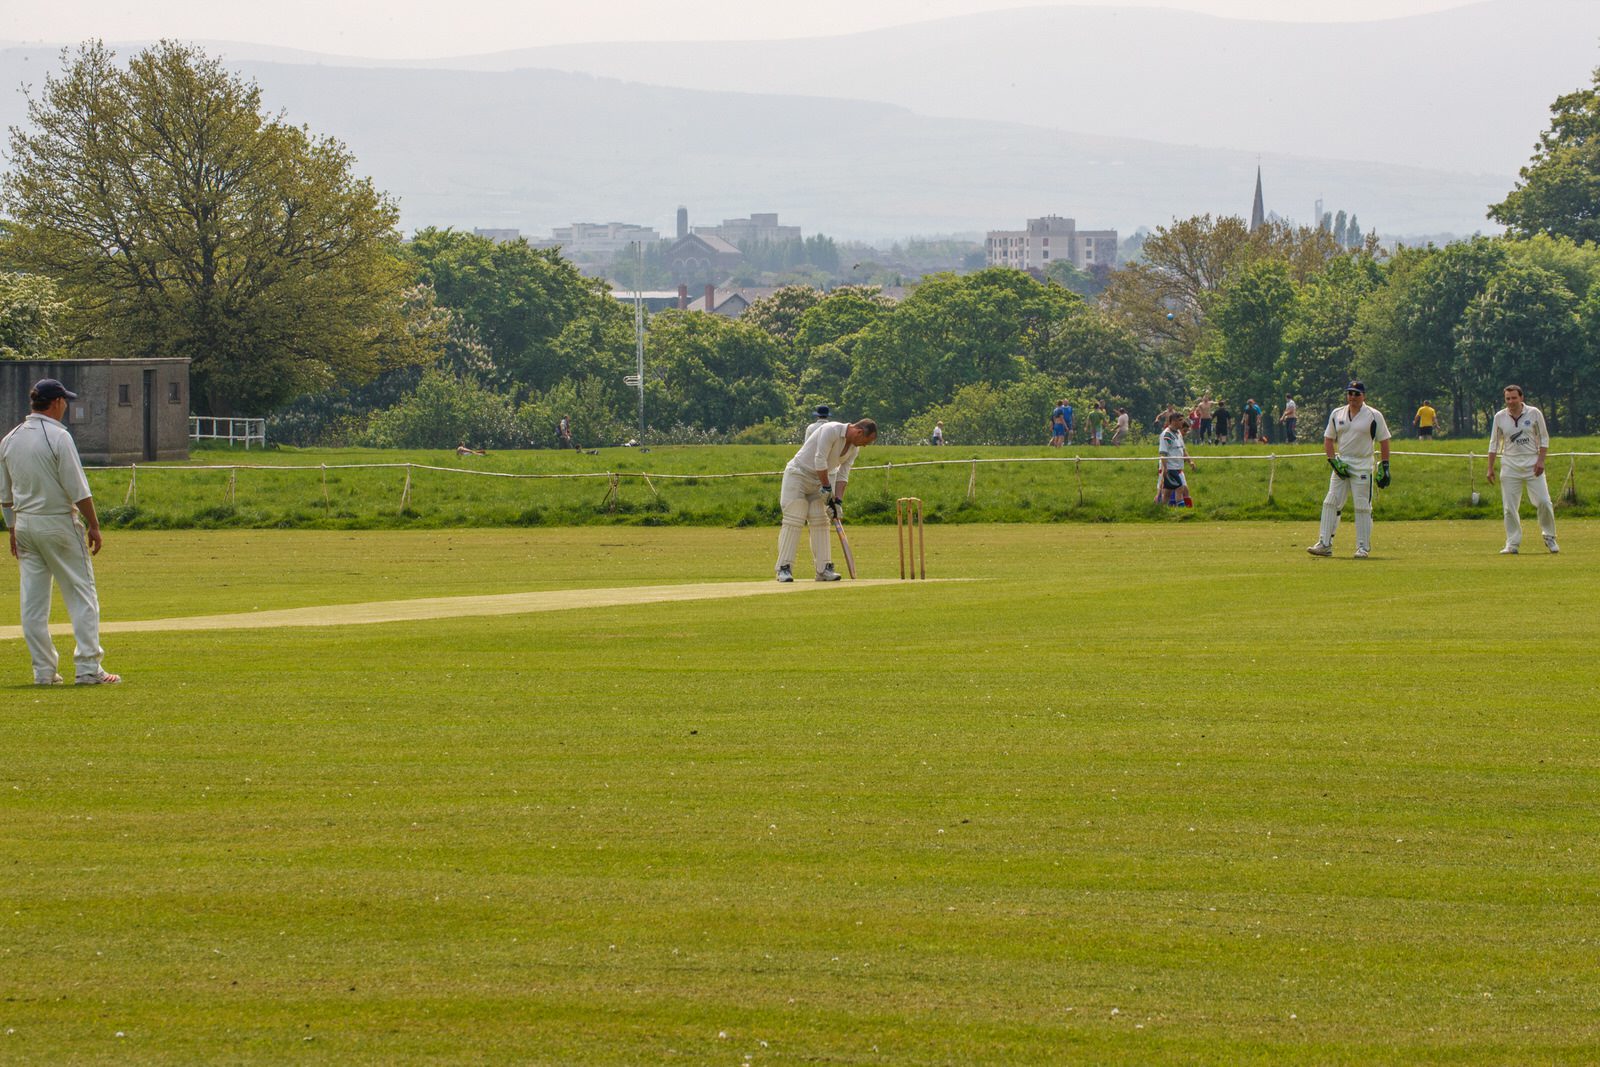 TWO CRICKET CLUBS IN PHOENIX PARK NEAR THE WELLINGTON MONUMENT 028